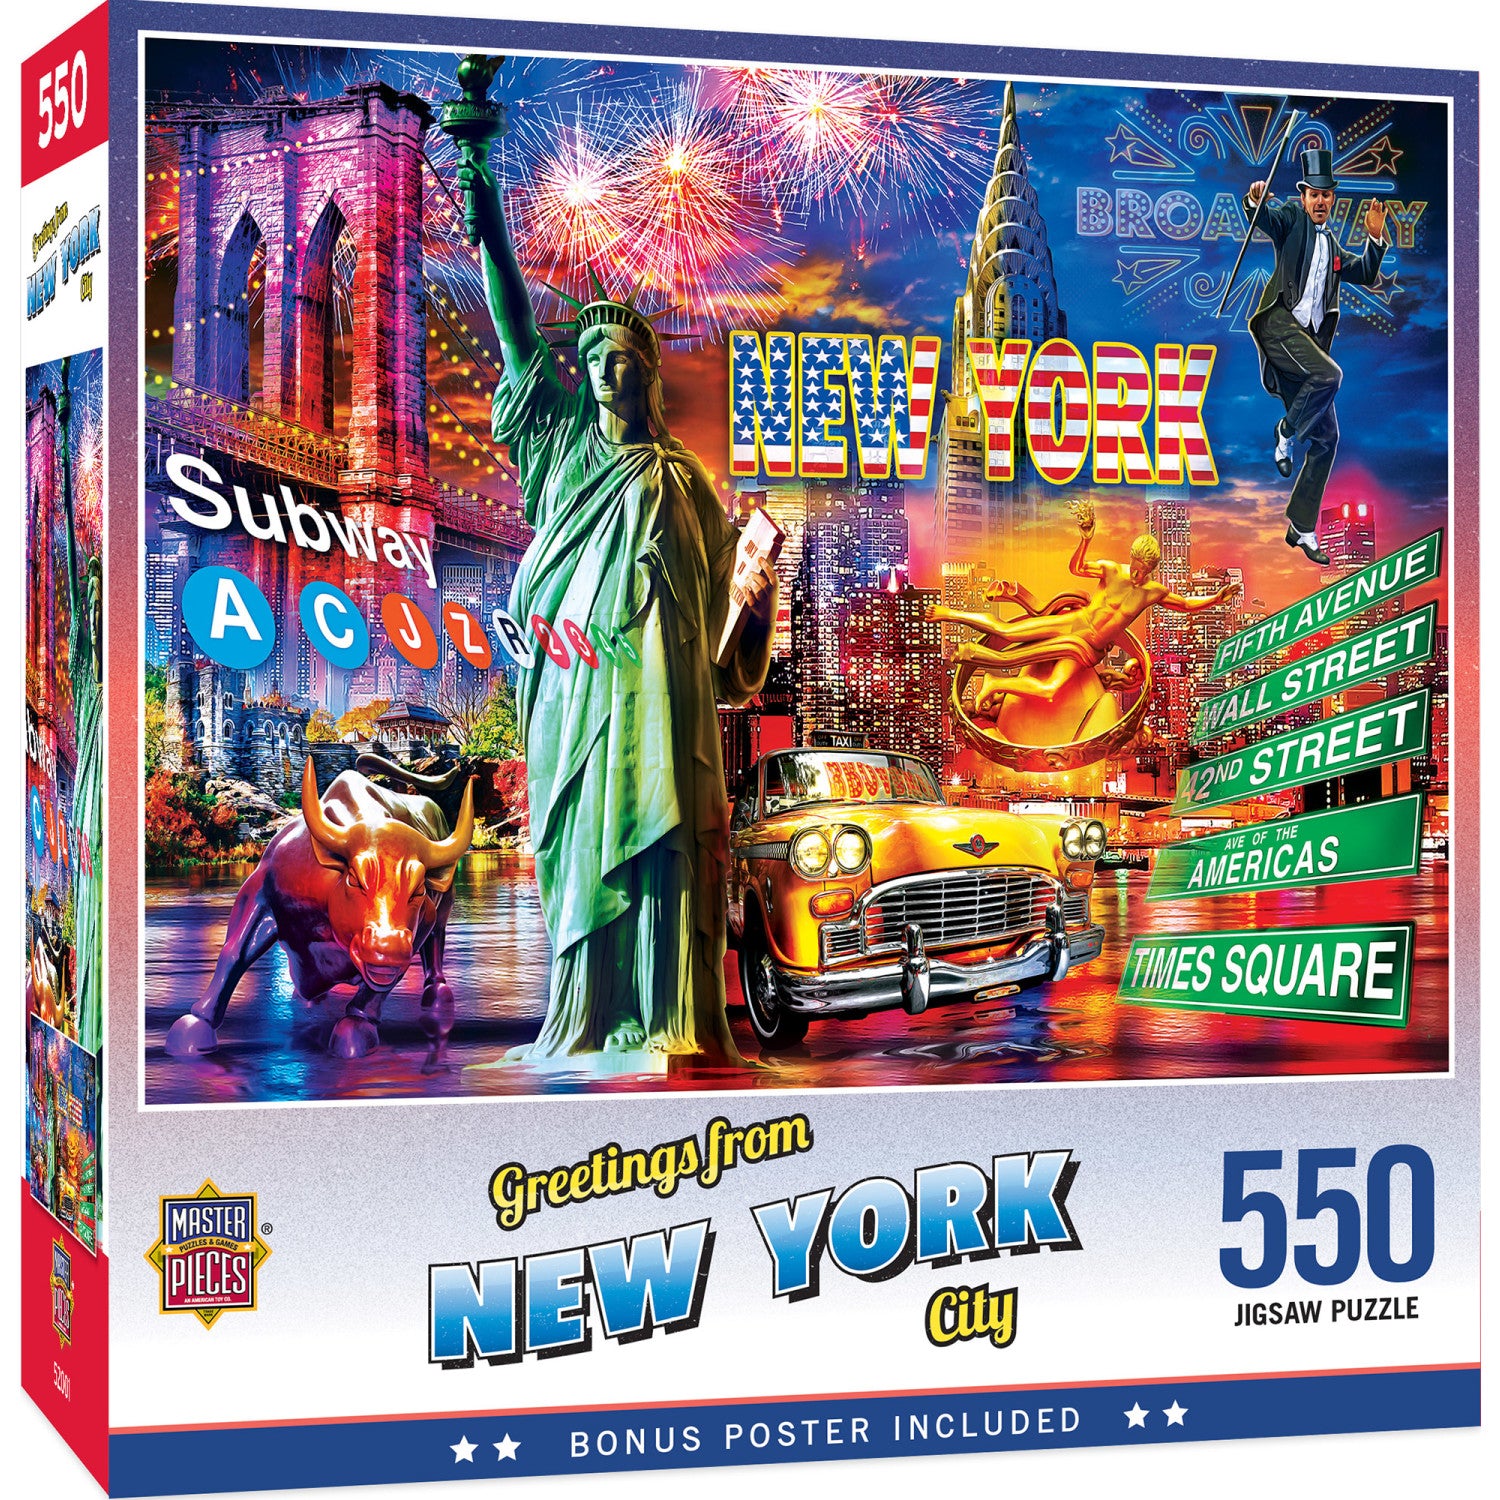 Greetings From New York City - 550 Piece Jigsaw Puzzle